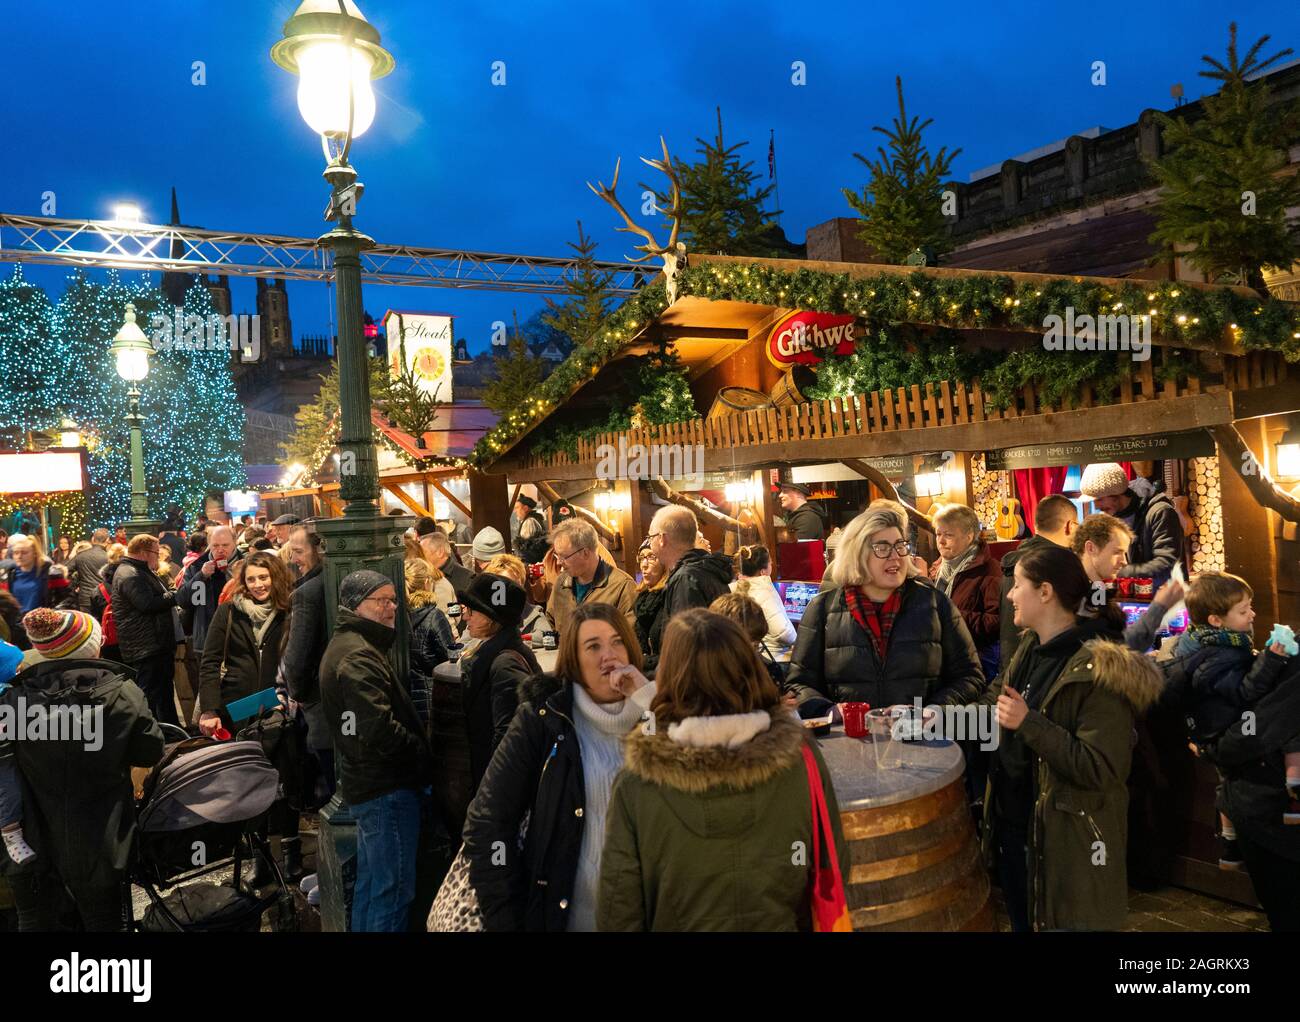 View of people eating and drinking at stalls in busy Edinburgh Christmas Market in West Princes Street gardens in Edinburgh, Scotland, UK Stock Photo